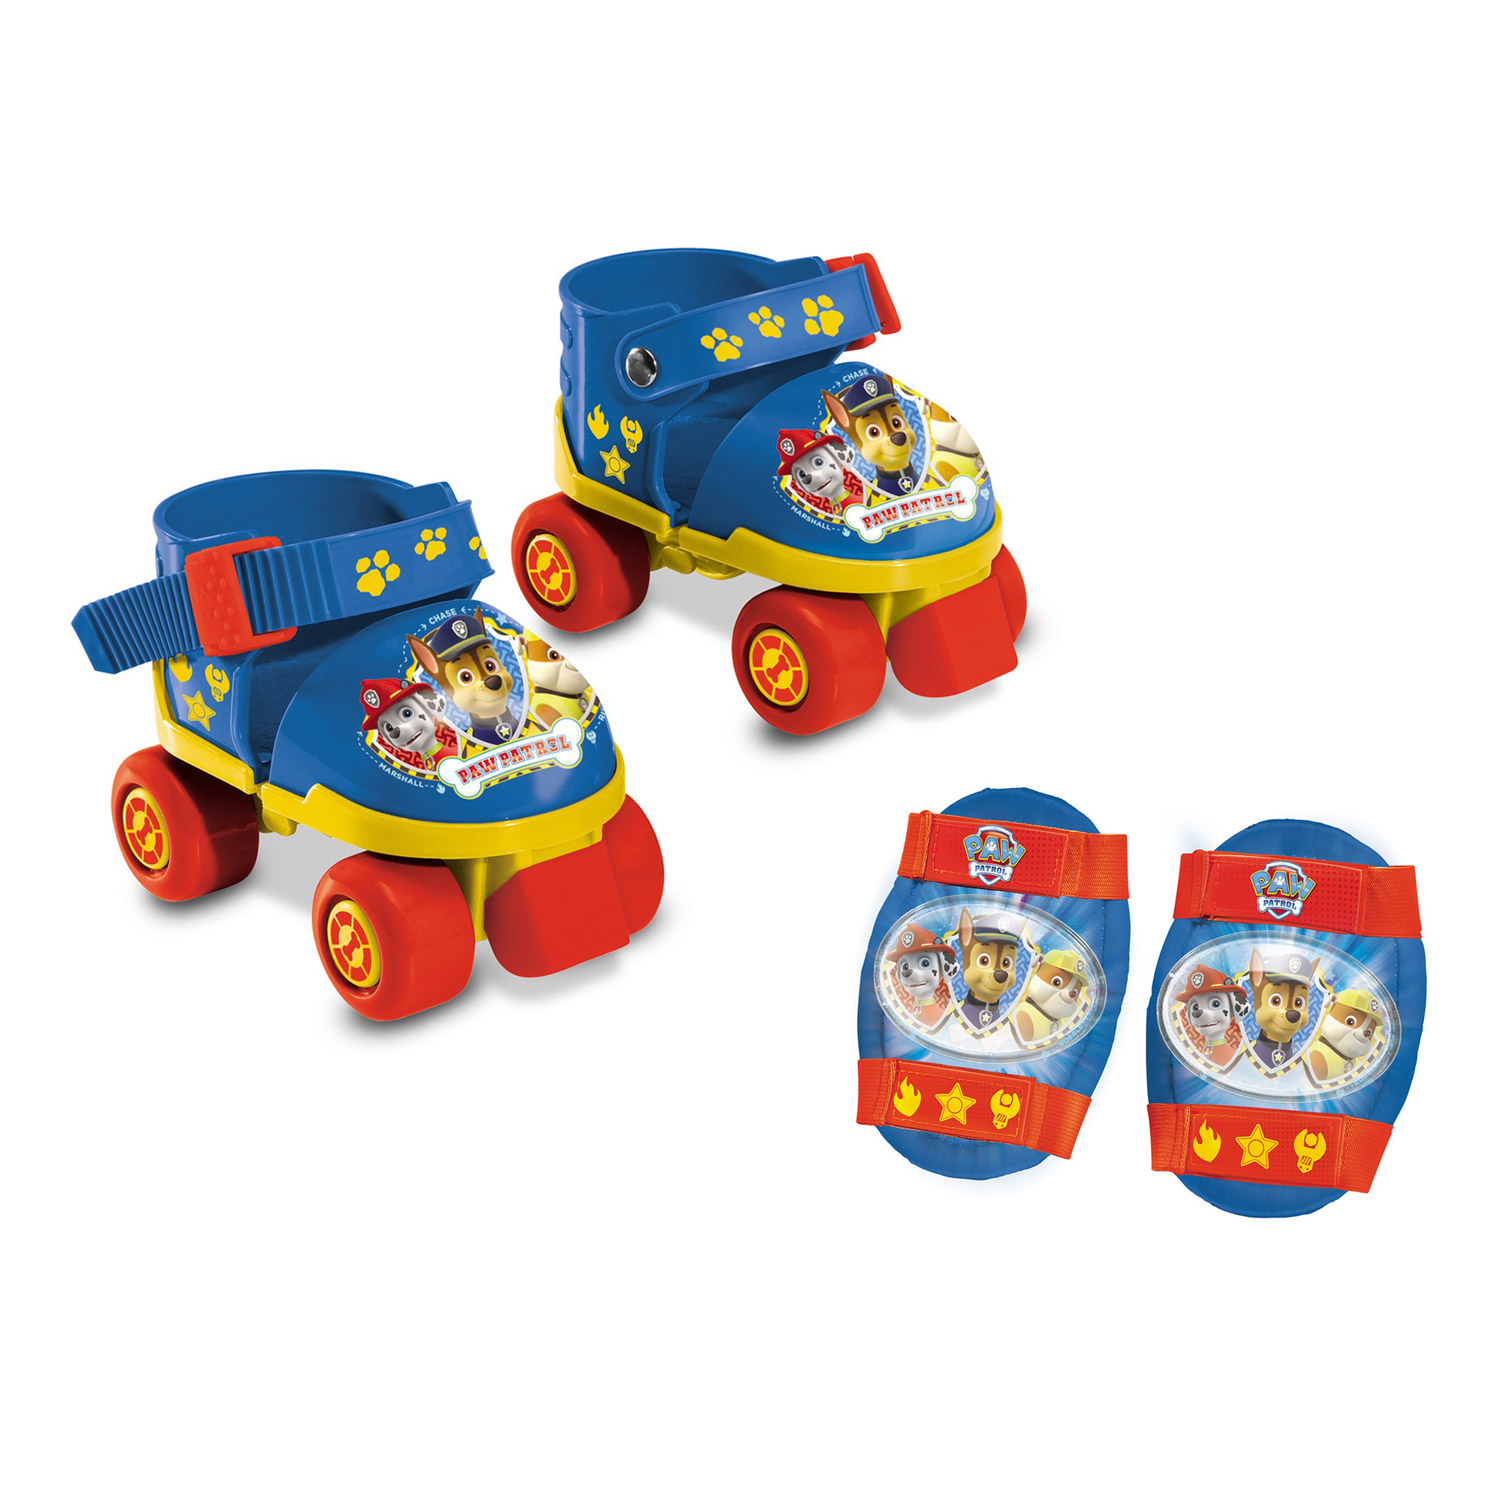 persoon Beeldhouwer Welsprekend PAW Patrol Roller Skates with Protection Set, size 22-29 | Thimble Toys